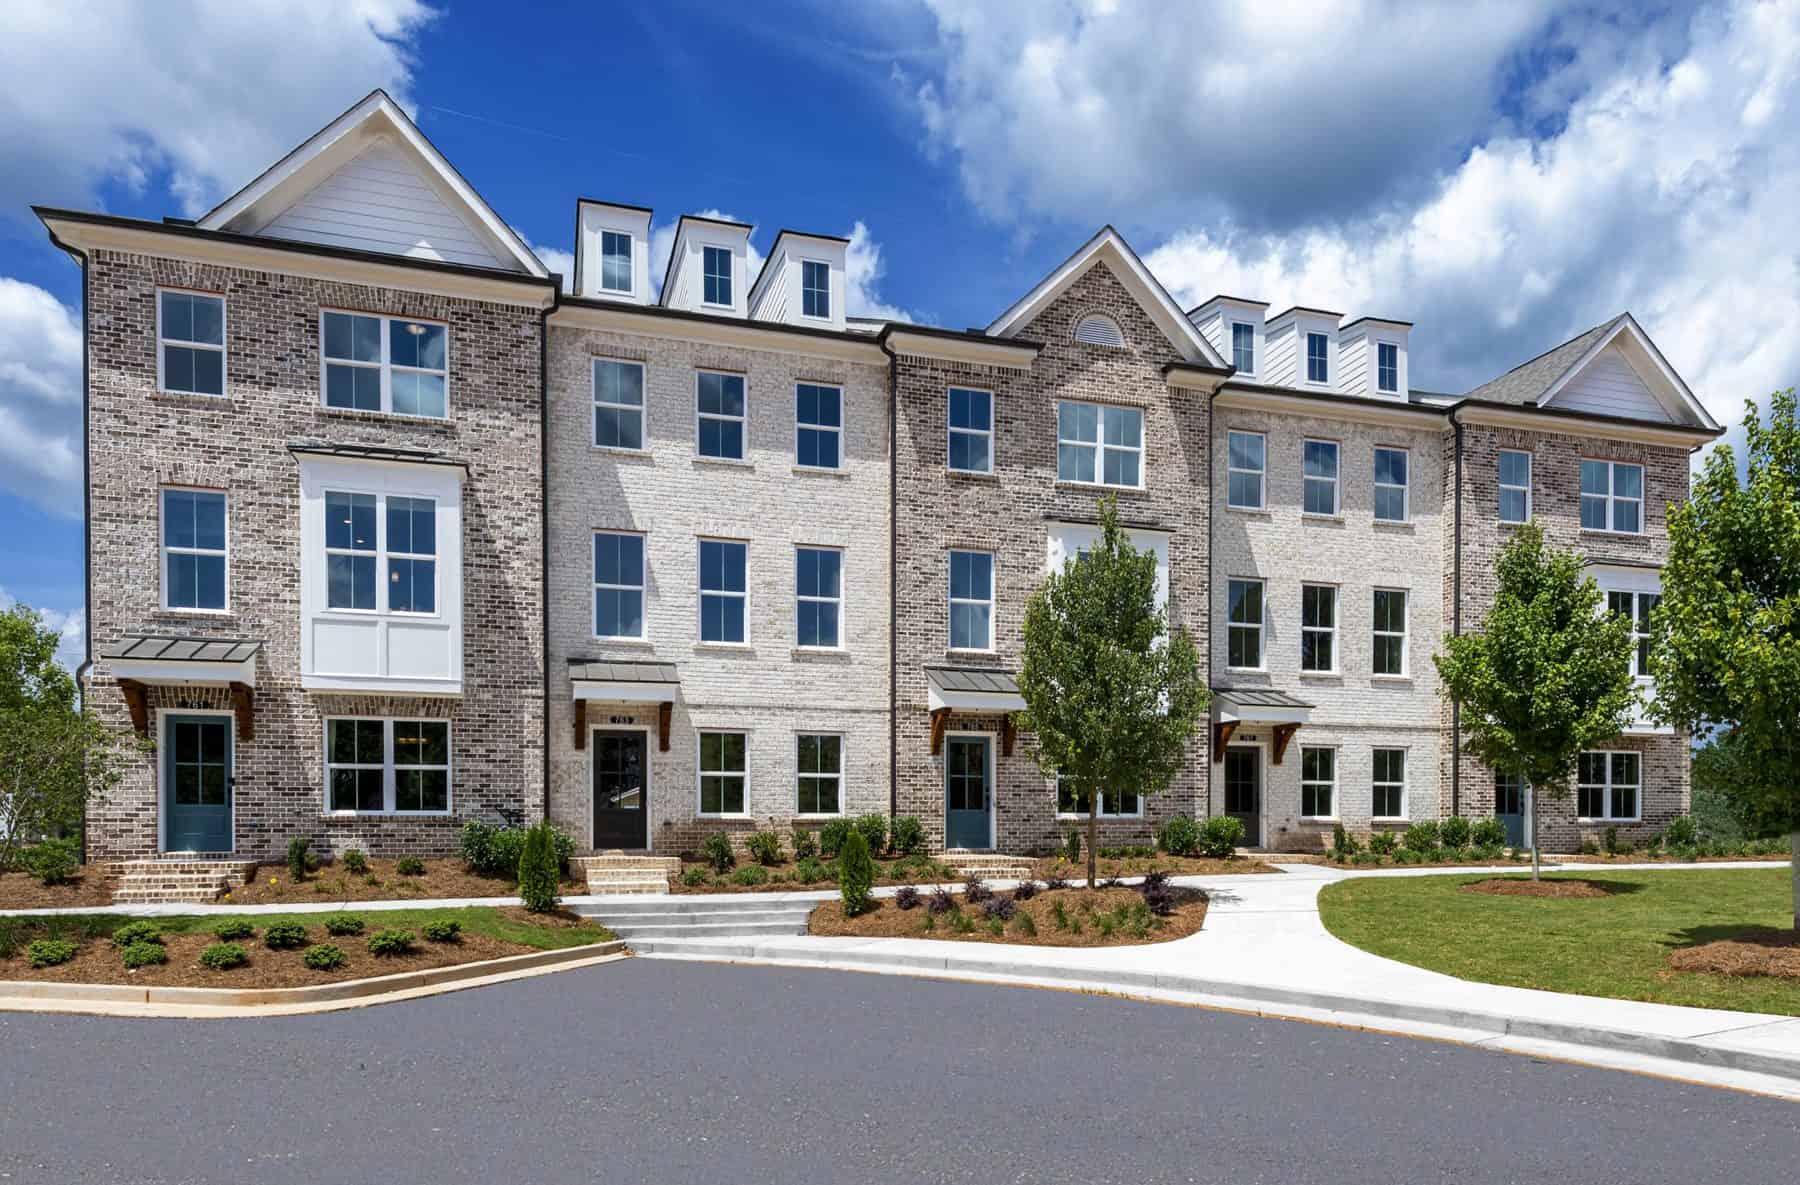 New Clarkston Townhomes Now Selling at Glendale Rowes